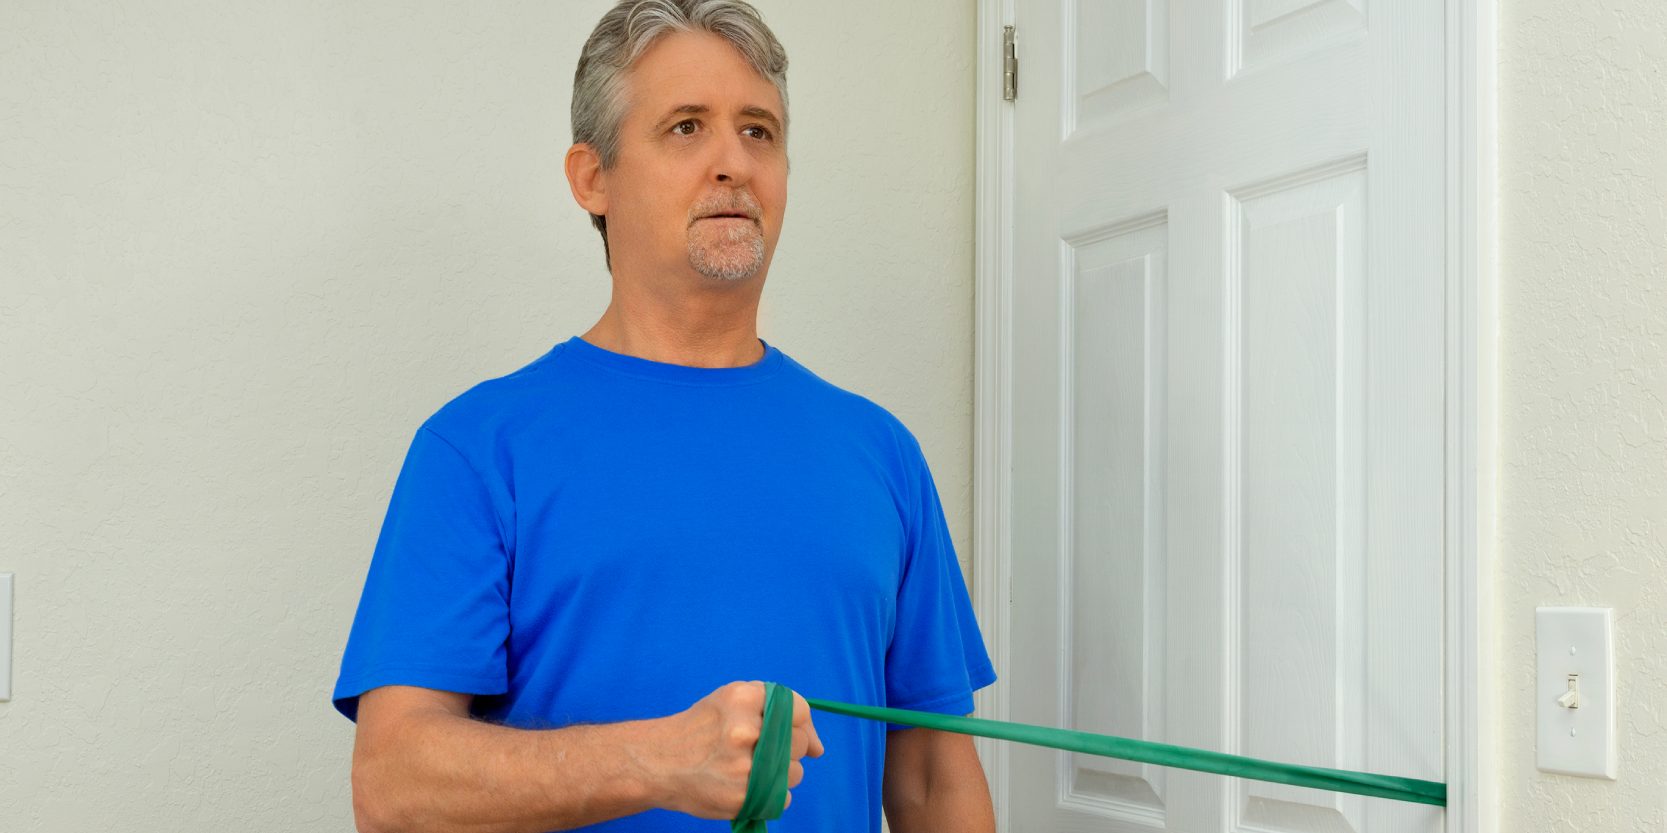 Middle age man doing shoulder surgery physical therapy with resistance rubber band exercises at home to strengthen the deltoid muscles to fully recover normal strength and flexibility.